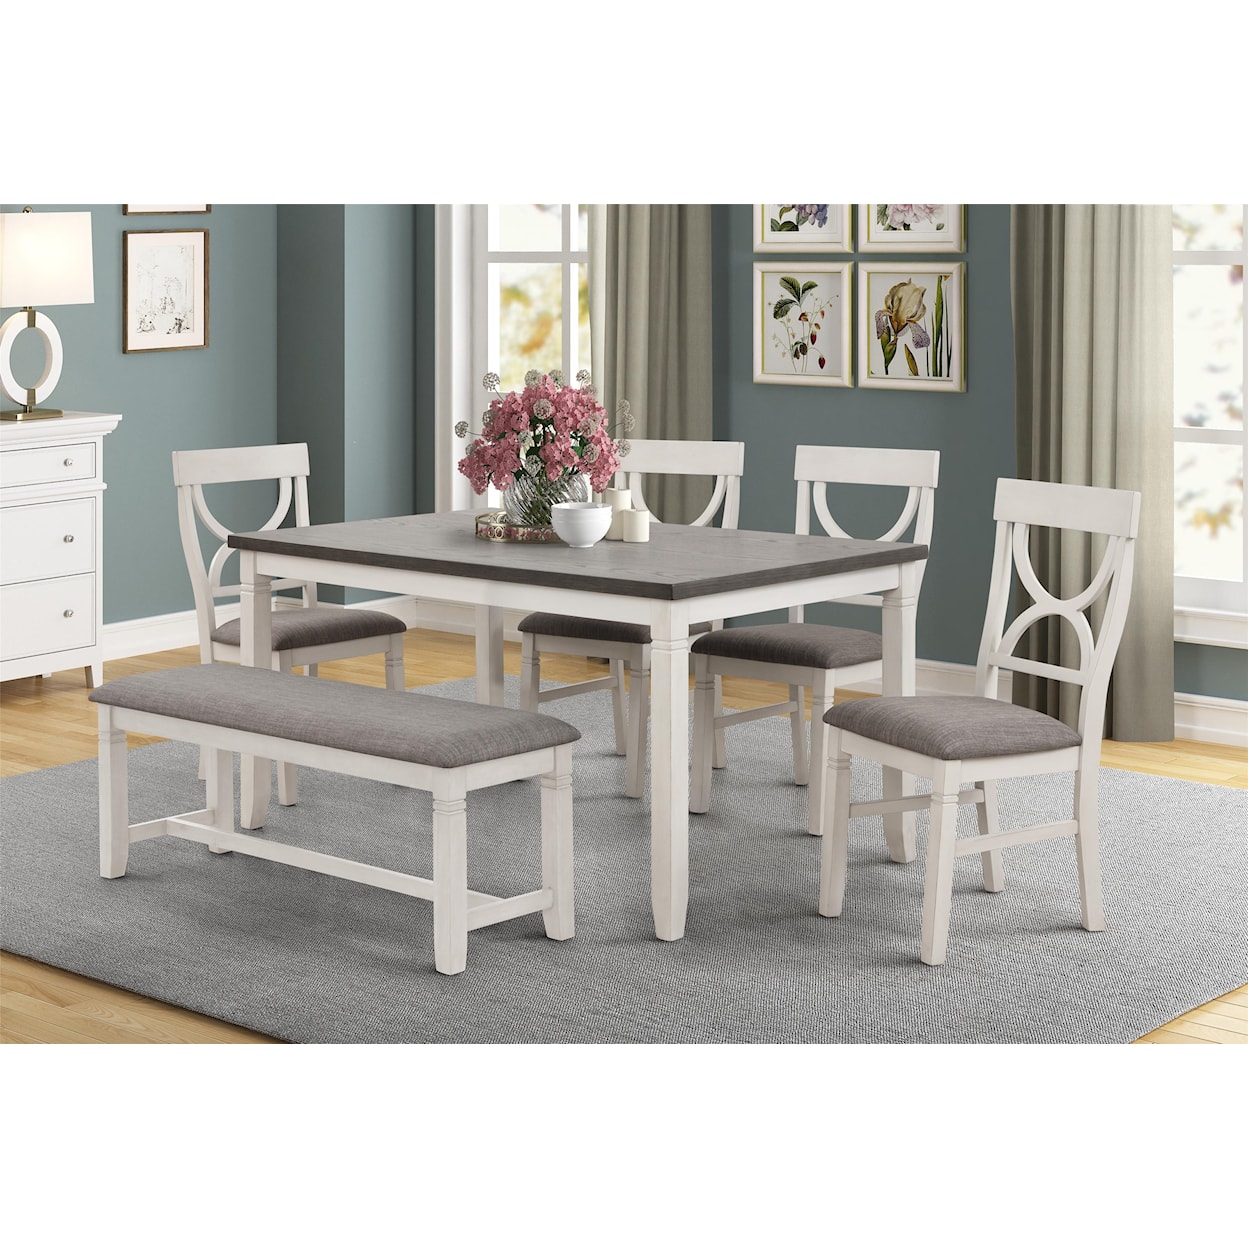 Lifestyle 8615 Dining Table, 4 Side Chairs and Bench